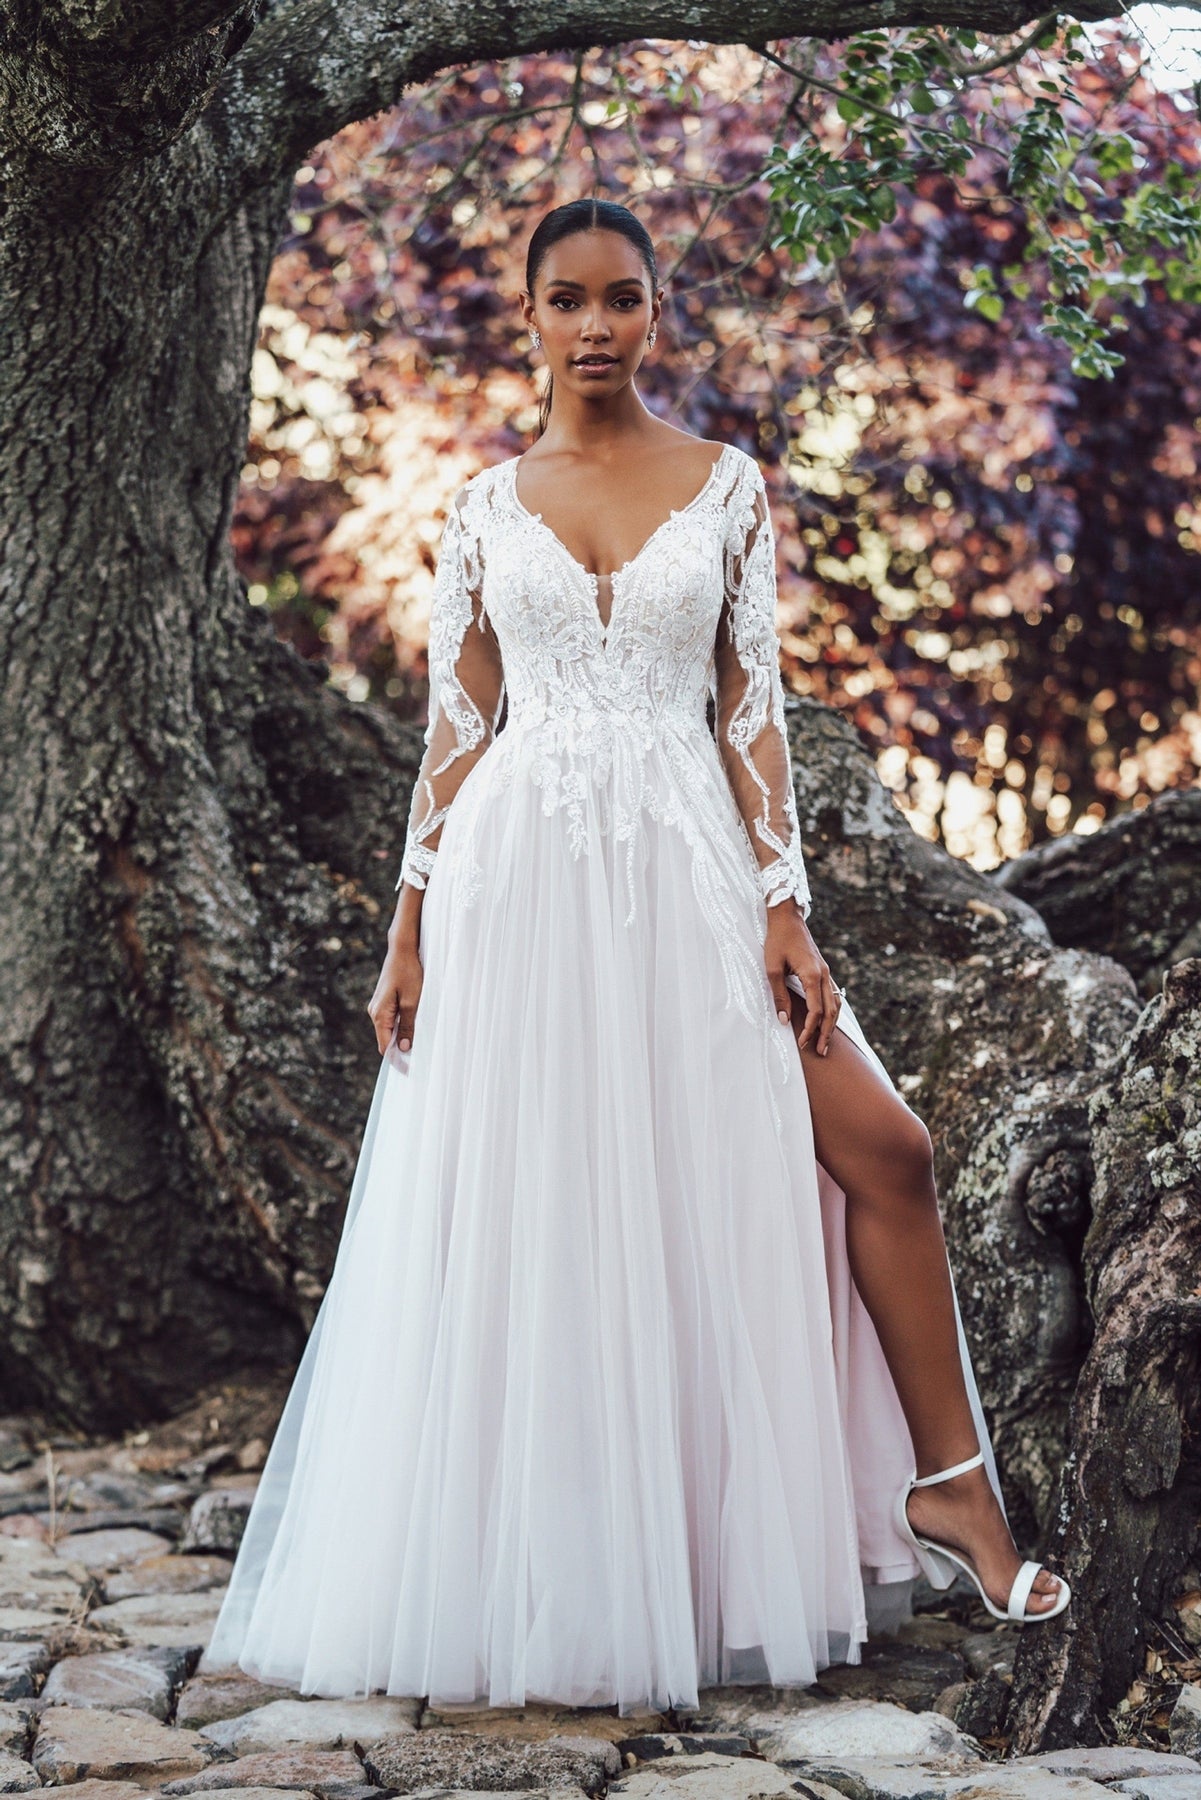 Shop Bridal Capes + Overskirts for Your Wedding Dress Online - Luxe Redux  Bridal